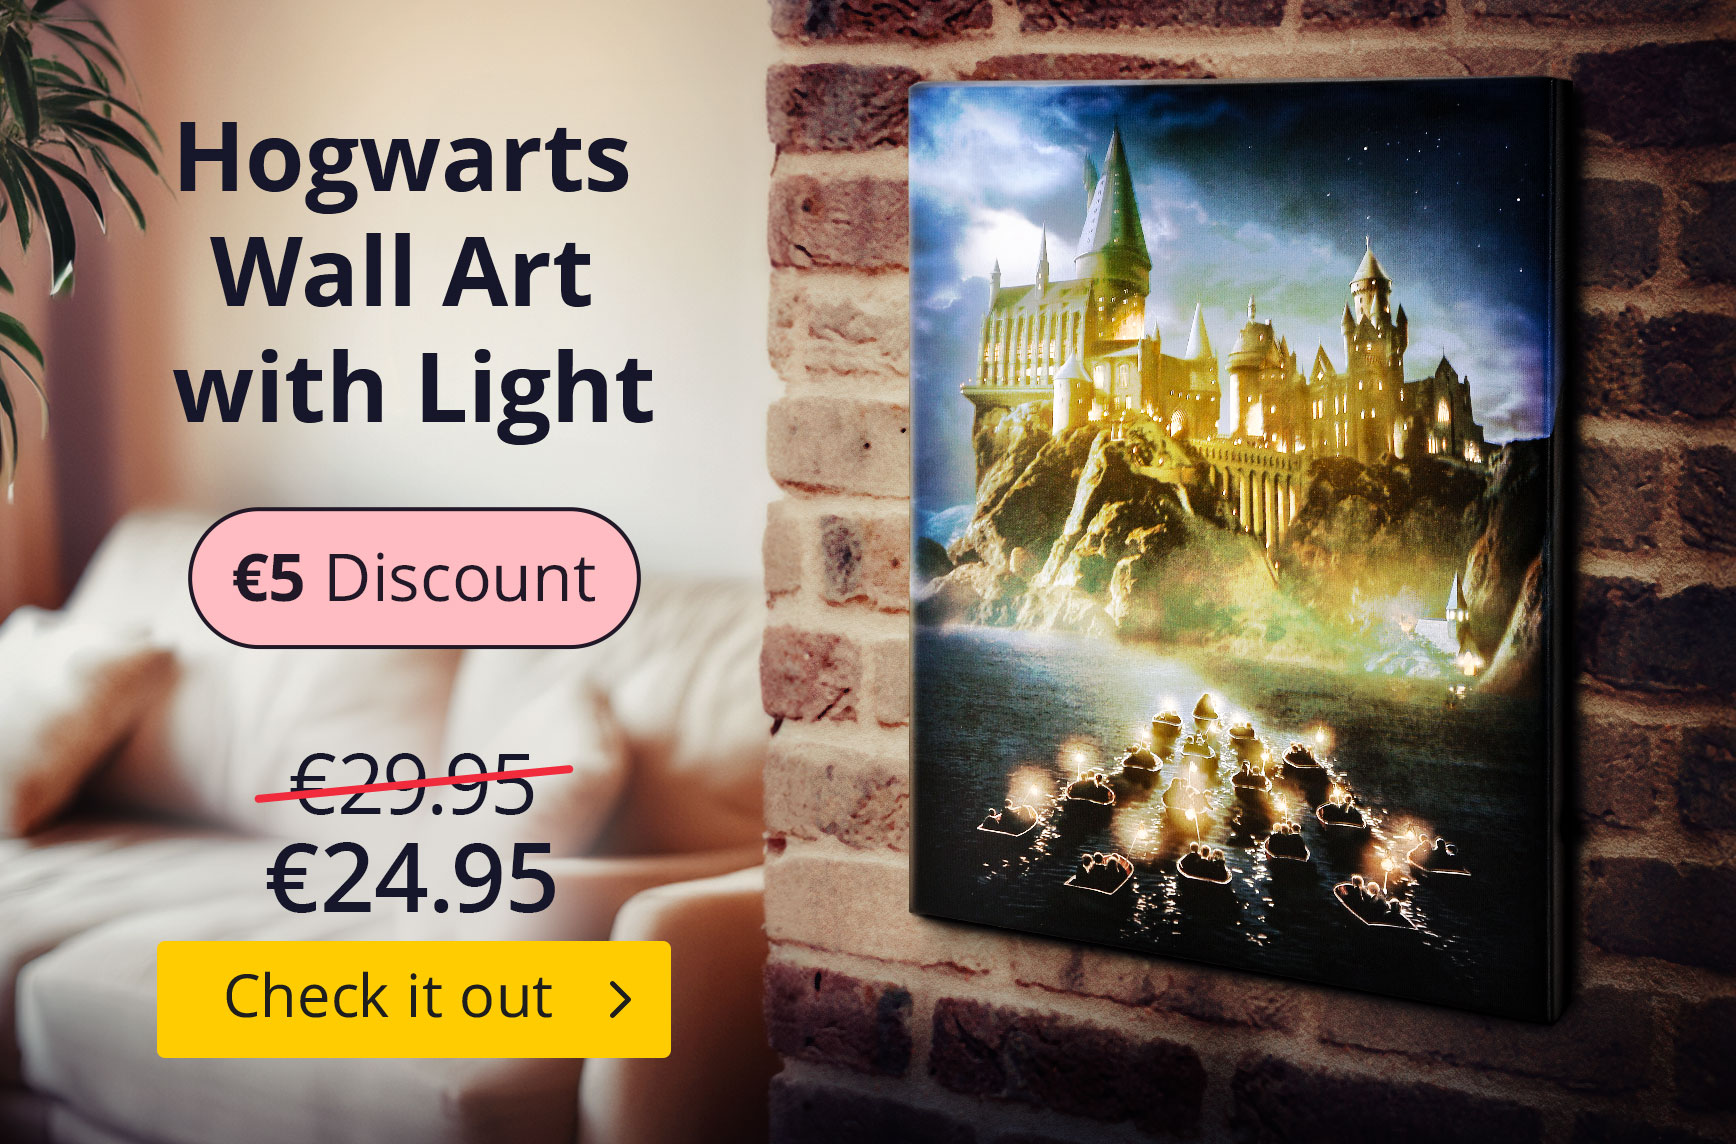 Harry Potter - Hogwarts Wall Art with Light - €24,95 instead of €29,95 - €5 Discount